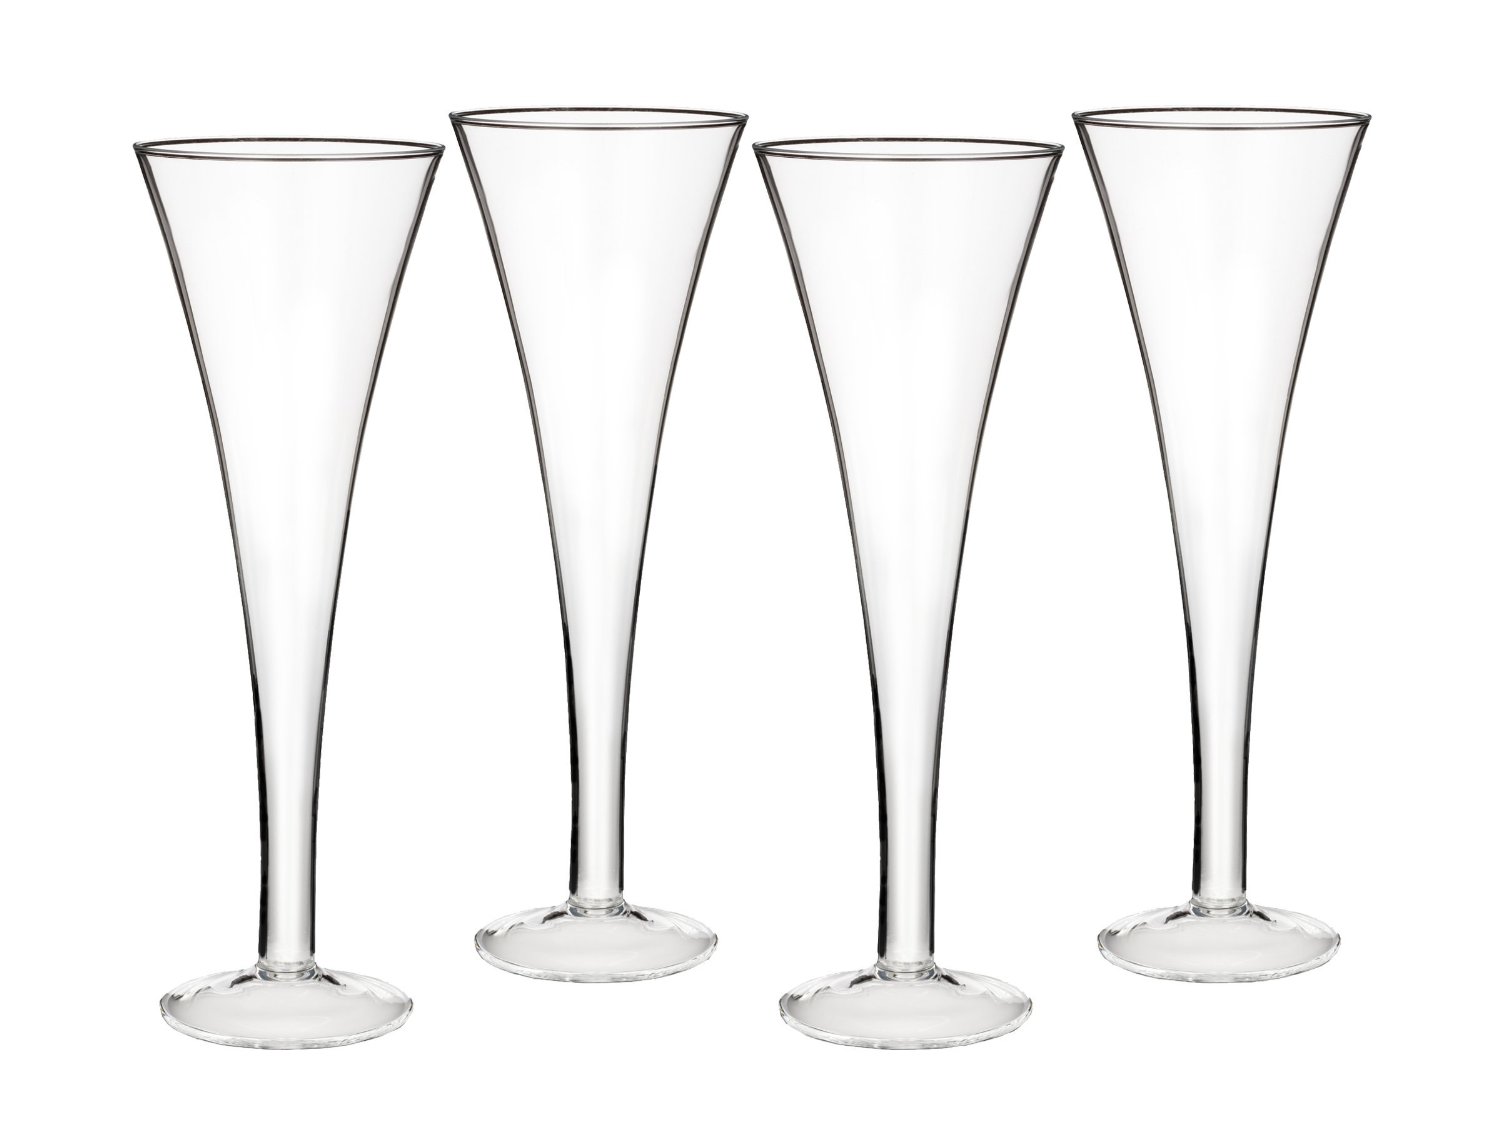 Marquis by Waterford Entertaining Collection Vintage Classic Trumpet Flute, Set of 4